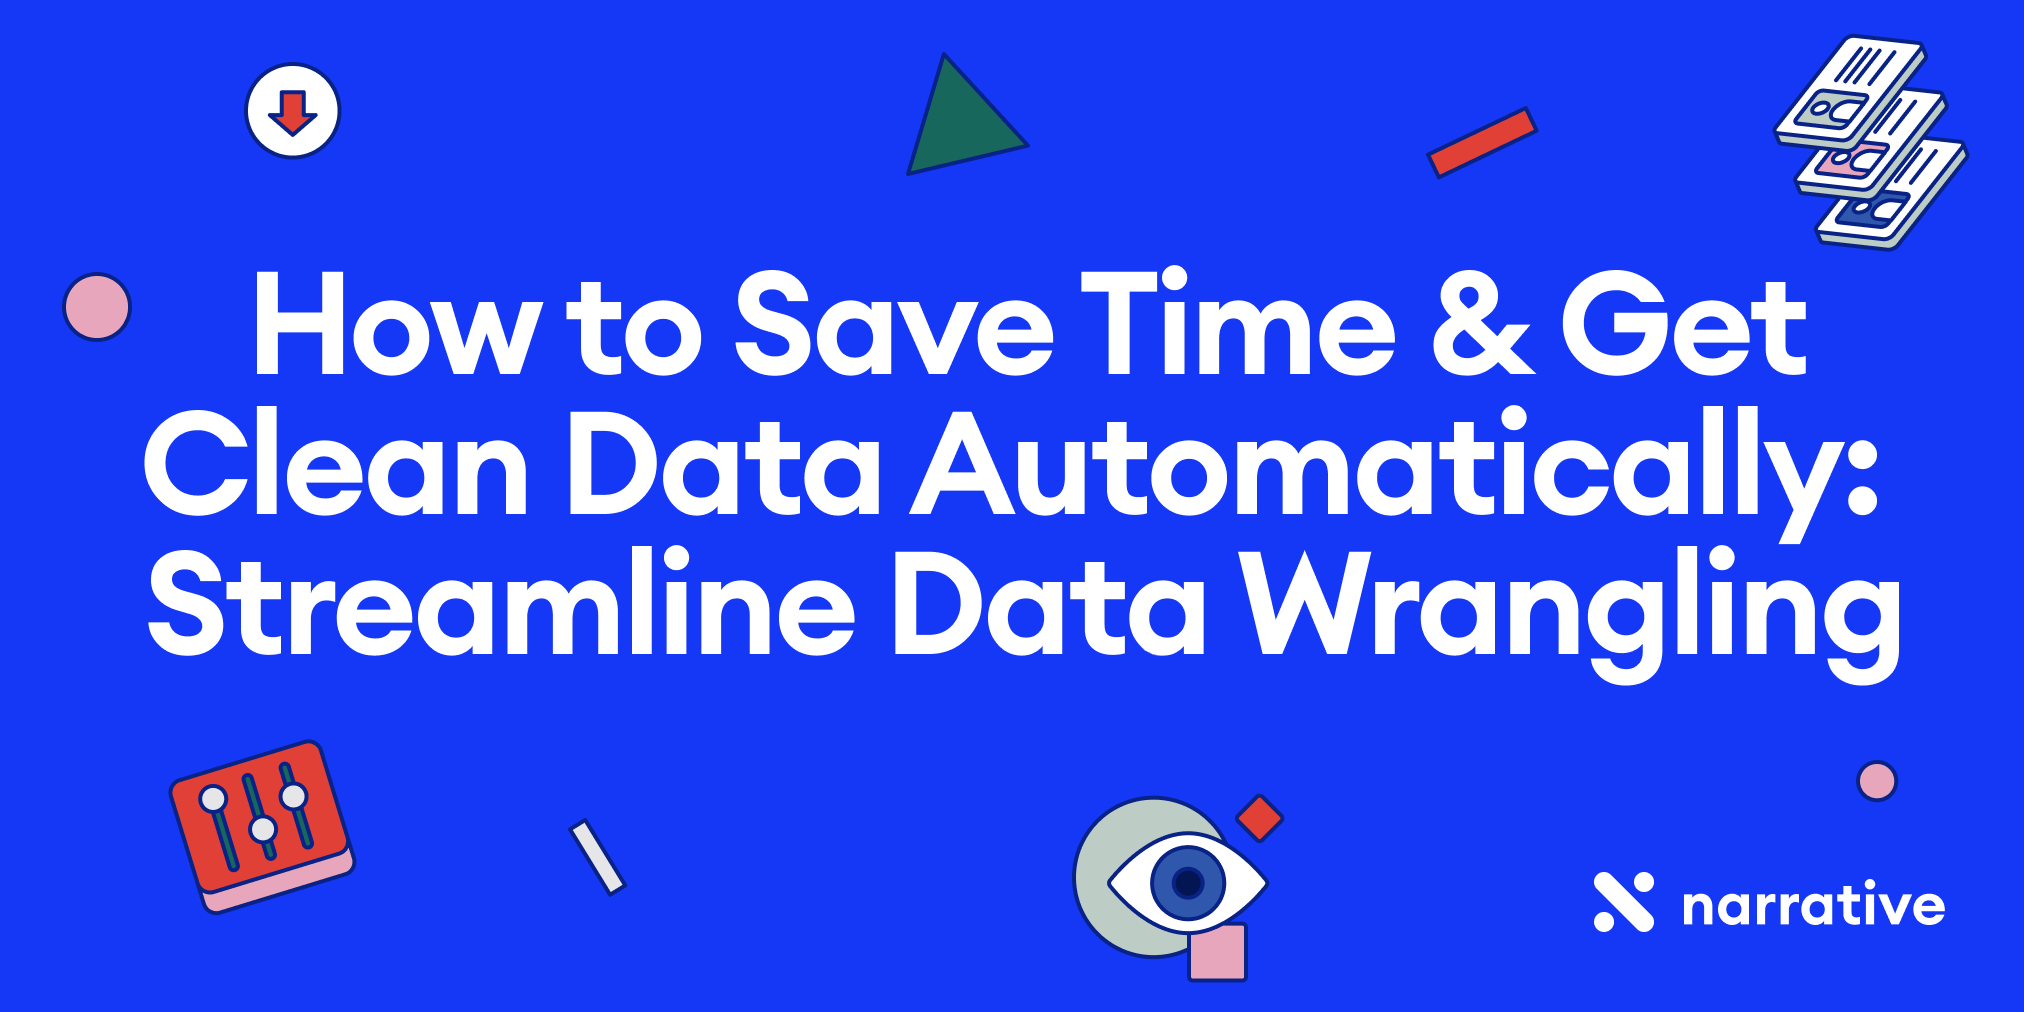 How to Save Time & Get Clean Data Automatically: Streamline Data Wrangling